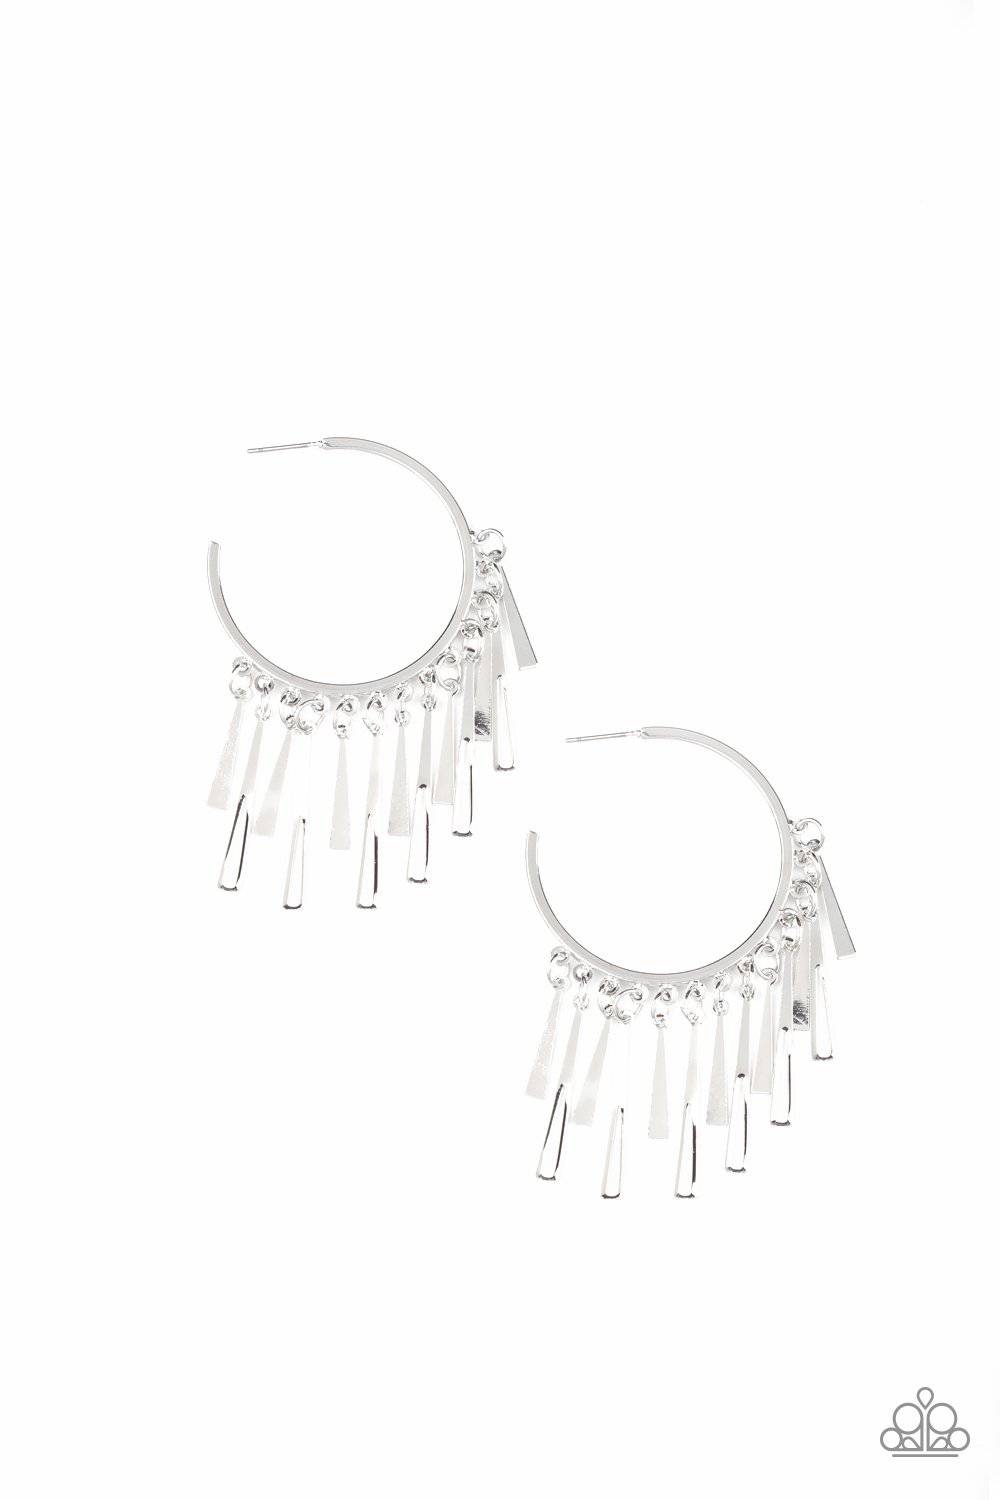 Bring The Noise - Silver Earrings - Paparazzi Accessories - GlaMarous Titi Jewels